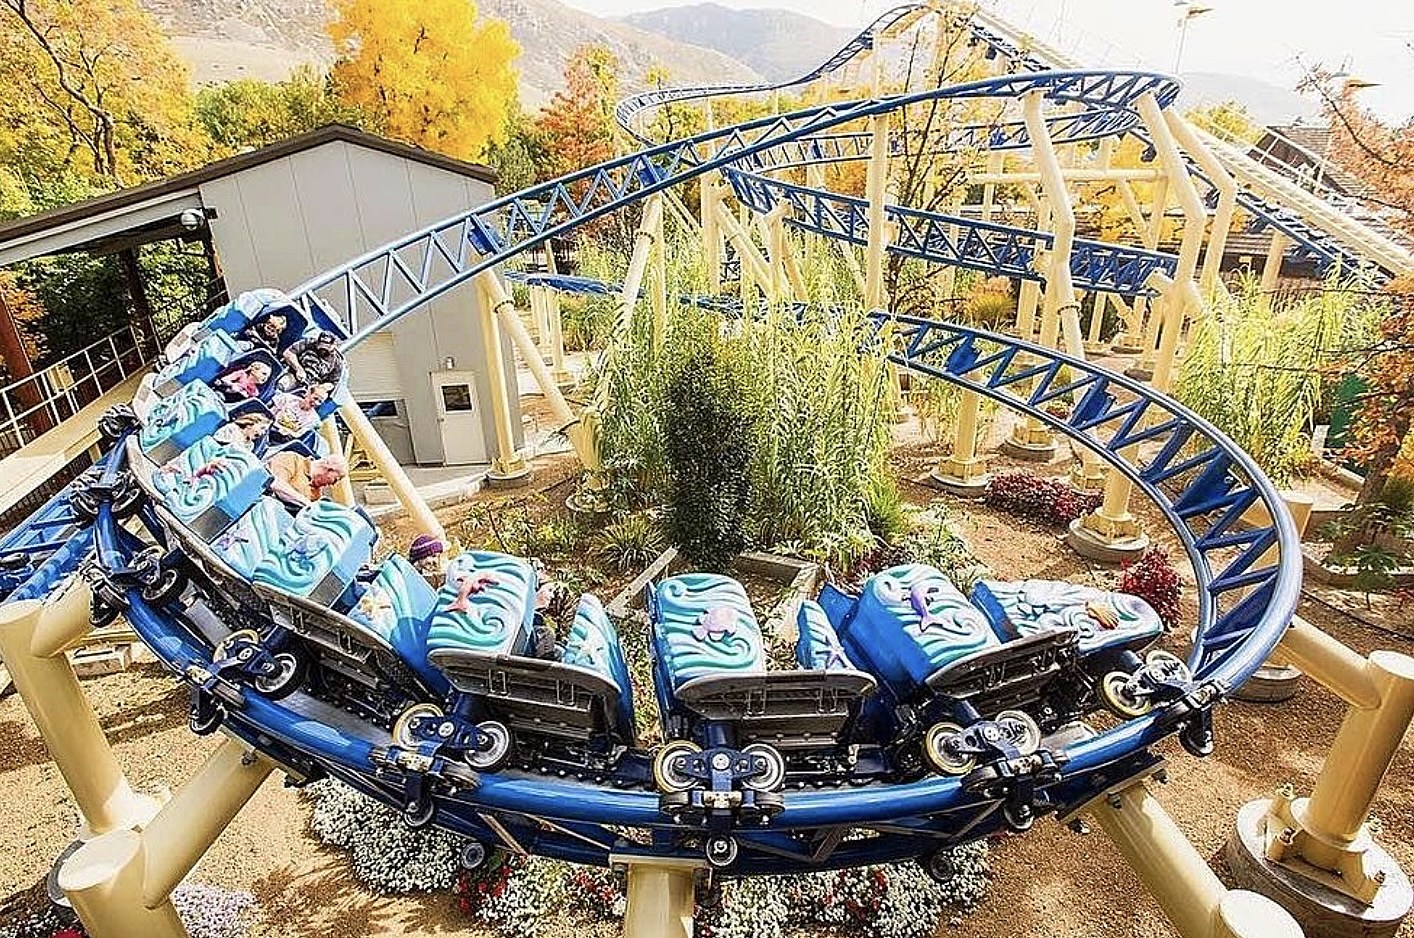 All of Utah's 9 Lagoon Roller Coasters Ranked from Worst to First